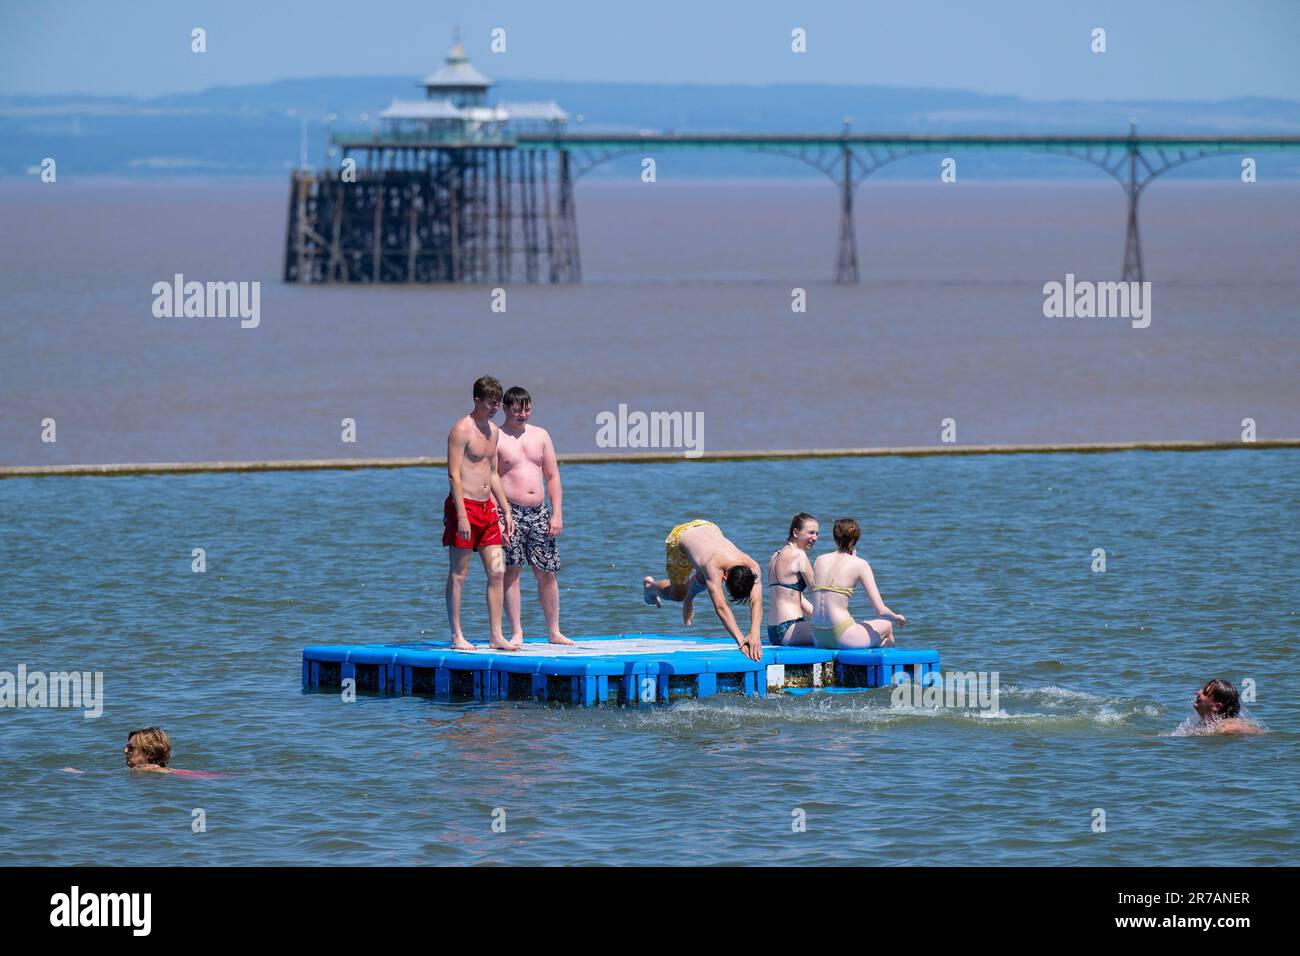 14.06.23. WEATHER SOMERSET. People enjoy the water at Clevedon Marine Lake in Somerset as temperatures across the United Kingdom remain high.  PIC © A Stock Photo